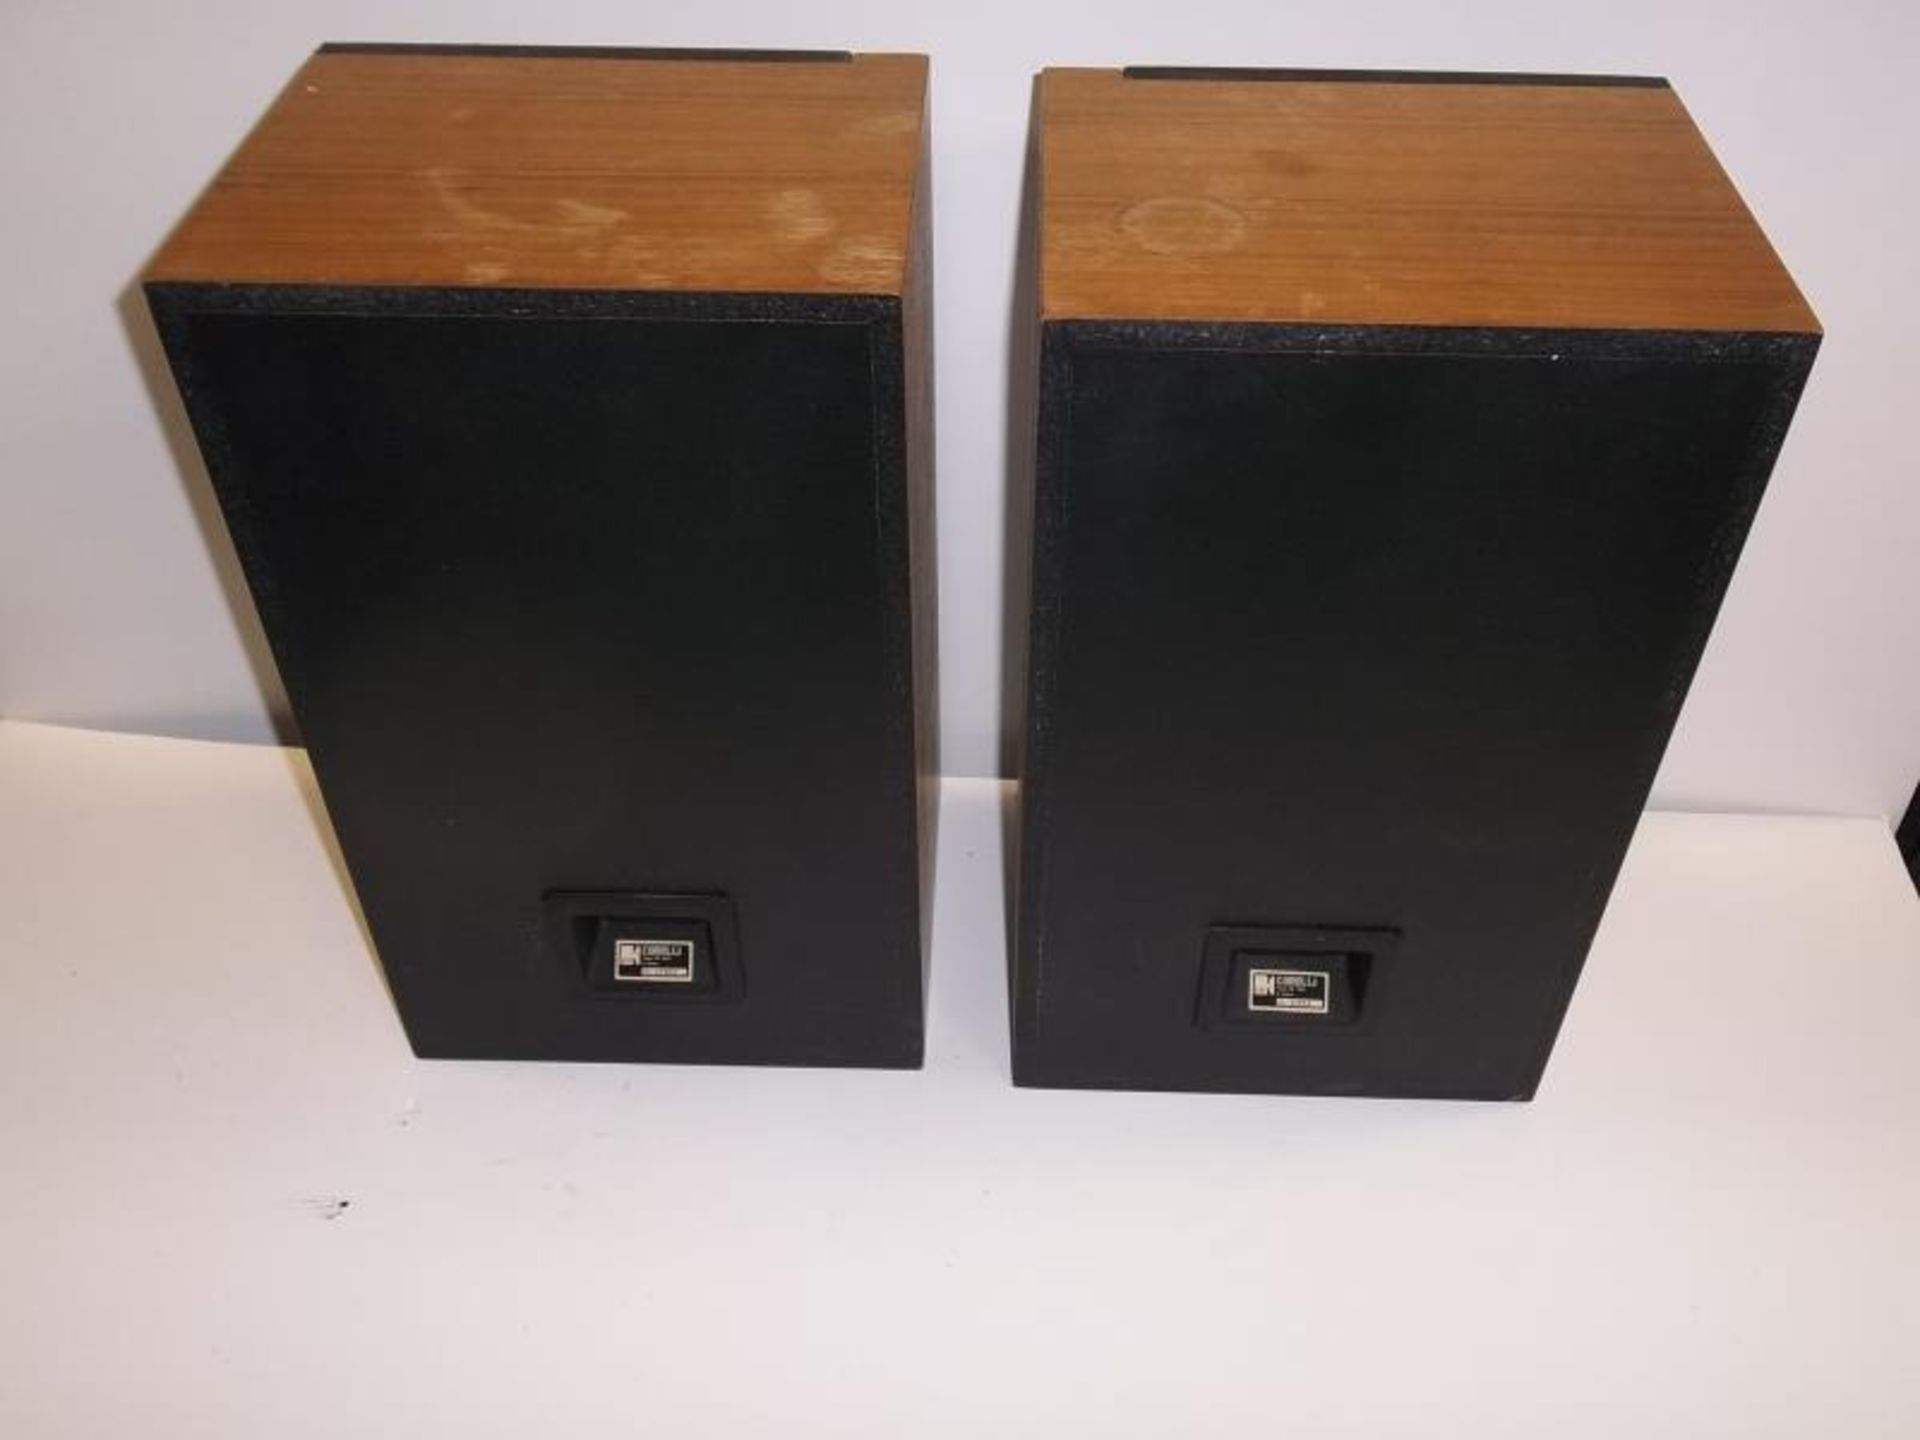 2 KEF Speakers, Corelli model 41693, 41694, missing KEF tag on corner, scratches and staining on - Image 3 of 3